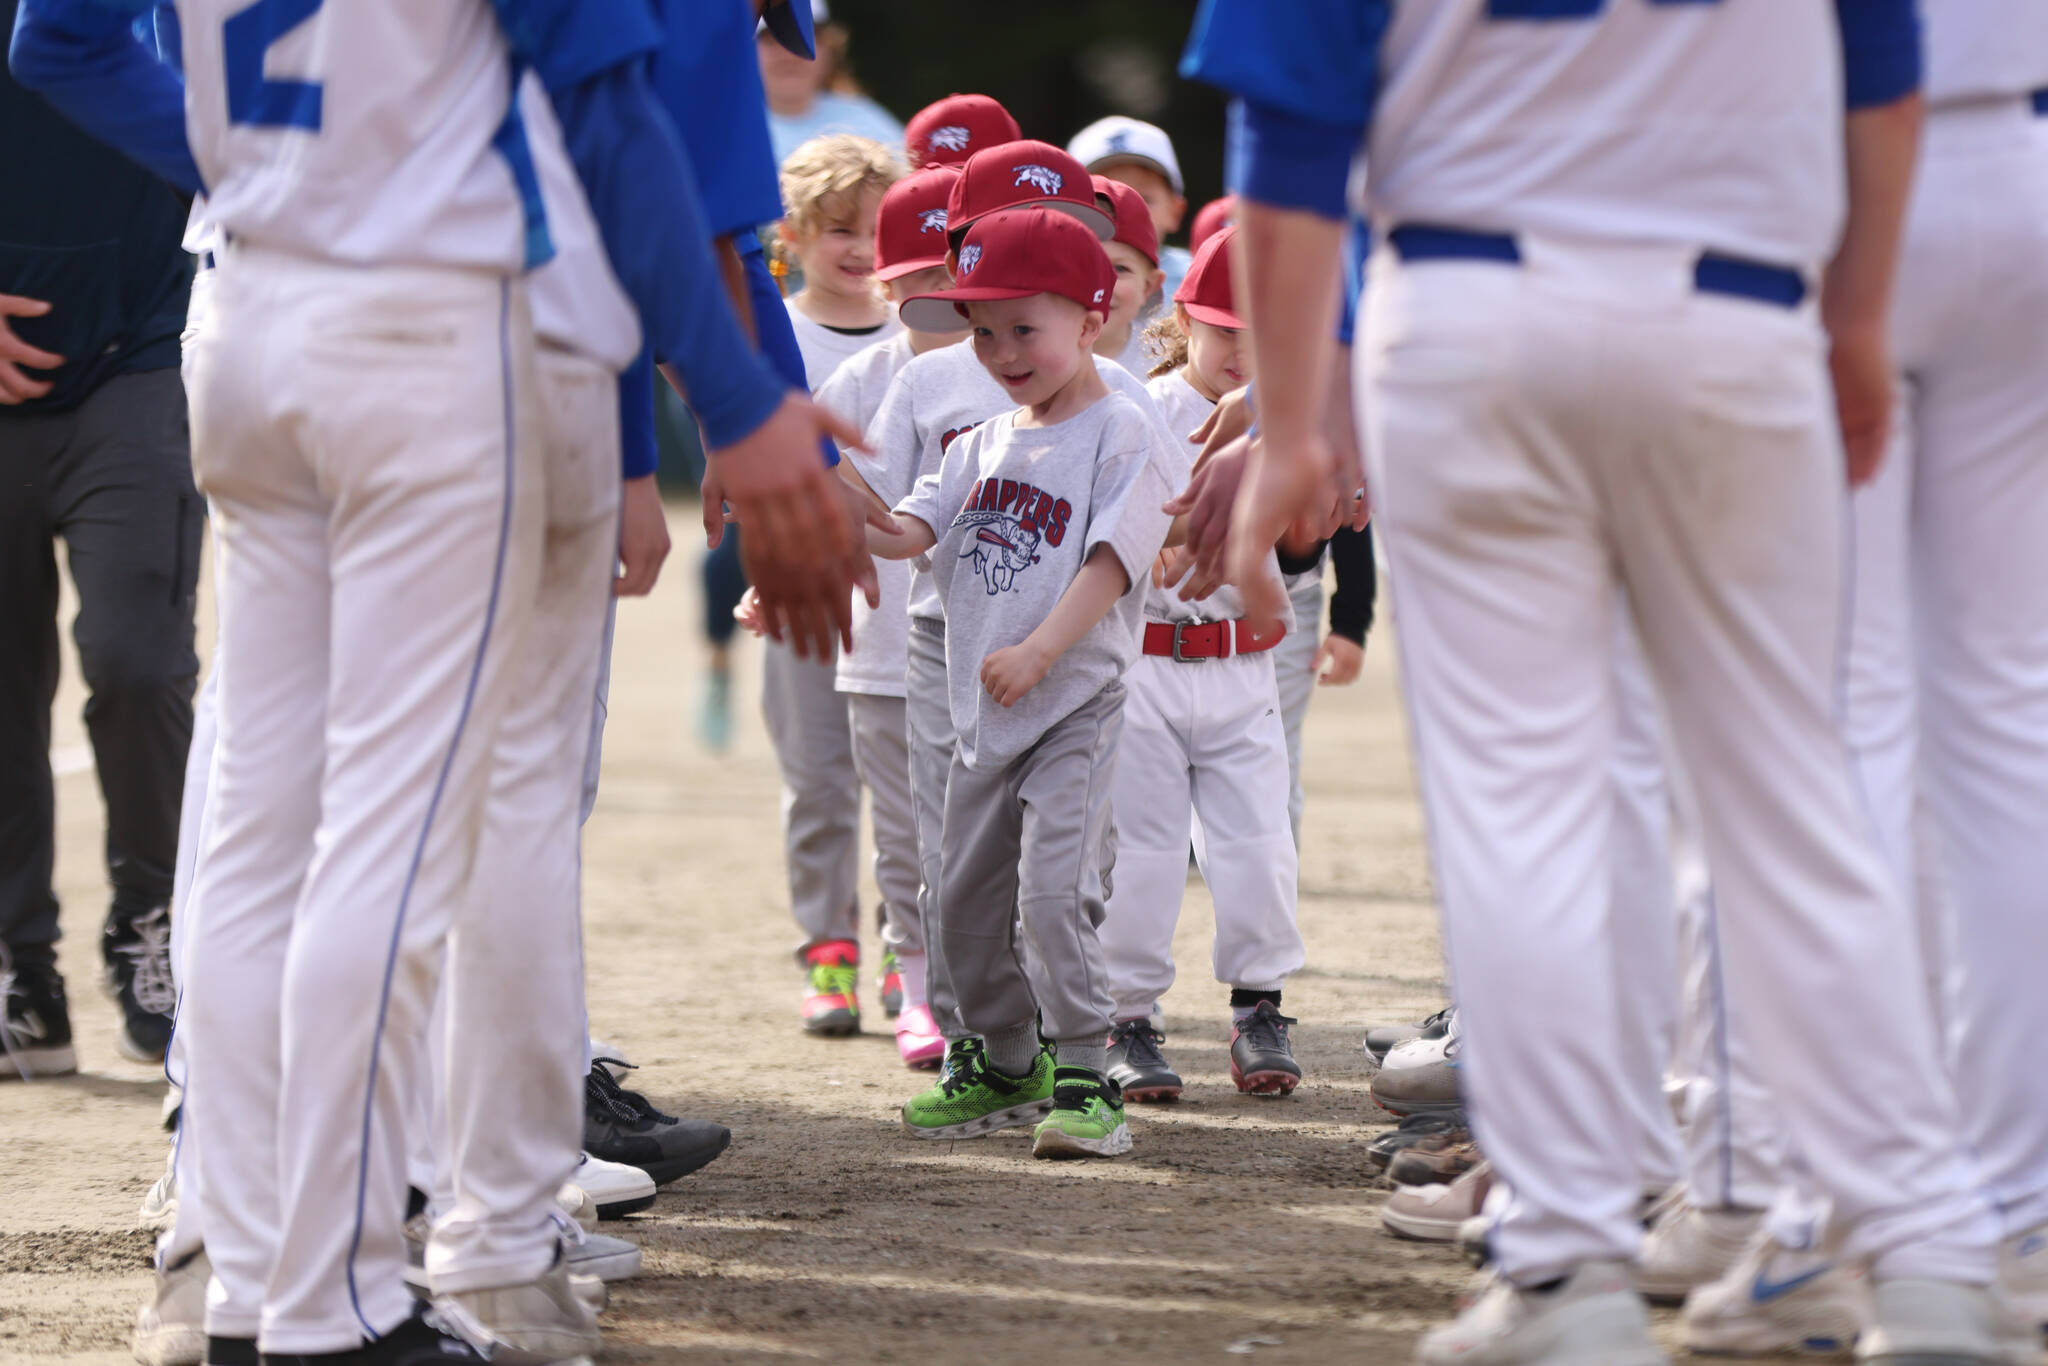 The Scrappers led by Ayden Thibodeau in front make their way through a line of Thunder Mountain High School baseball players on Gastineau Channel Little League’s opening day. Forty teams took part in festivities held Saturday at Adair-Kennedy Memorial Park. (Ben Hohenstatt / Juneau Empire)